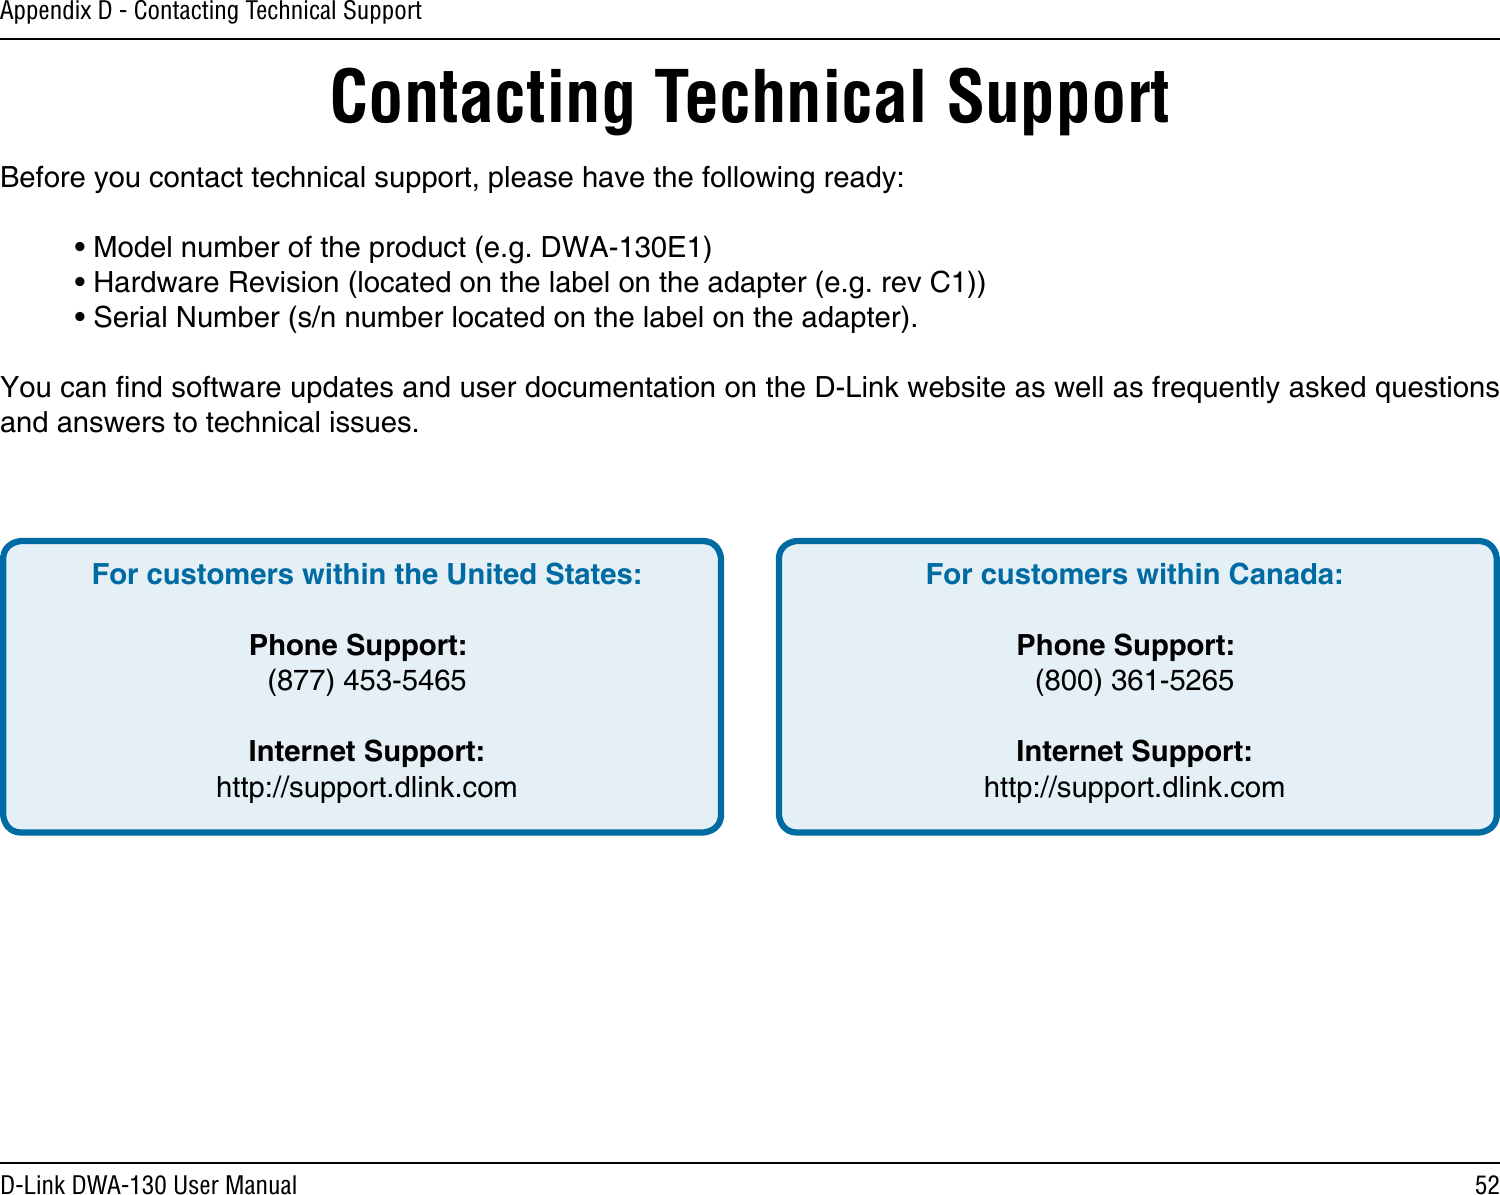 52D-Link DWA-130 User ManualAppendix D - Contacting Technical SupportContacting Technical SupportBefore you contact technical support, please have the following ready:  • Model number of the product (e.g. DWA-130E1)  • Hardware Revision (located on the label on the adapter (e.g. rev C1))  • Serial Number (s/n number located on the label on the adapter). You can nd software updates and user documentation on the D-Link website as well as frequently asked questions and answers to technical issues.For customers within the United States: Phone Support:  (877) 453-5465 Internet Support:  http://support.dlink.com For customers within Canada: Phone Support:  (800) 361-5265   Internet Support:  http://support.dlink.com 